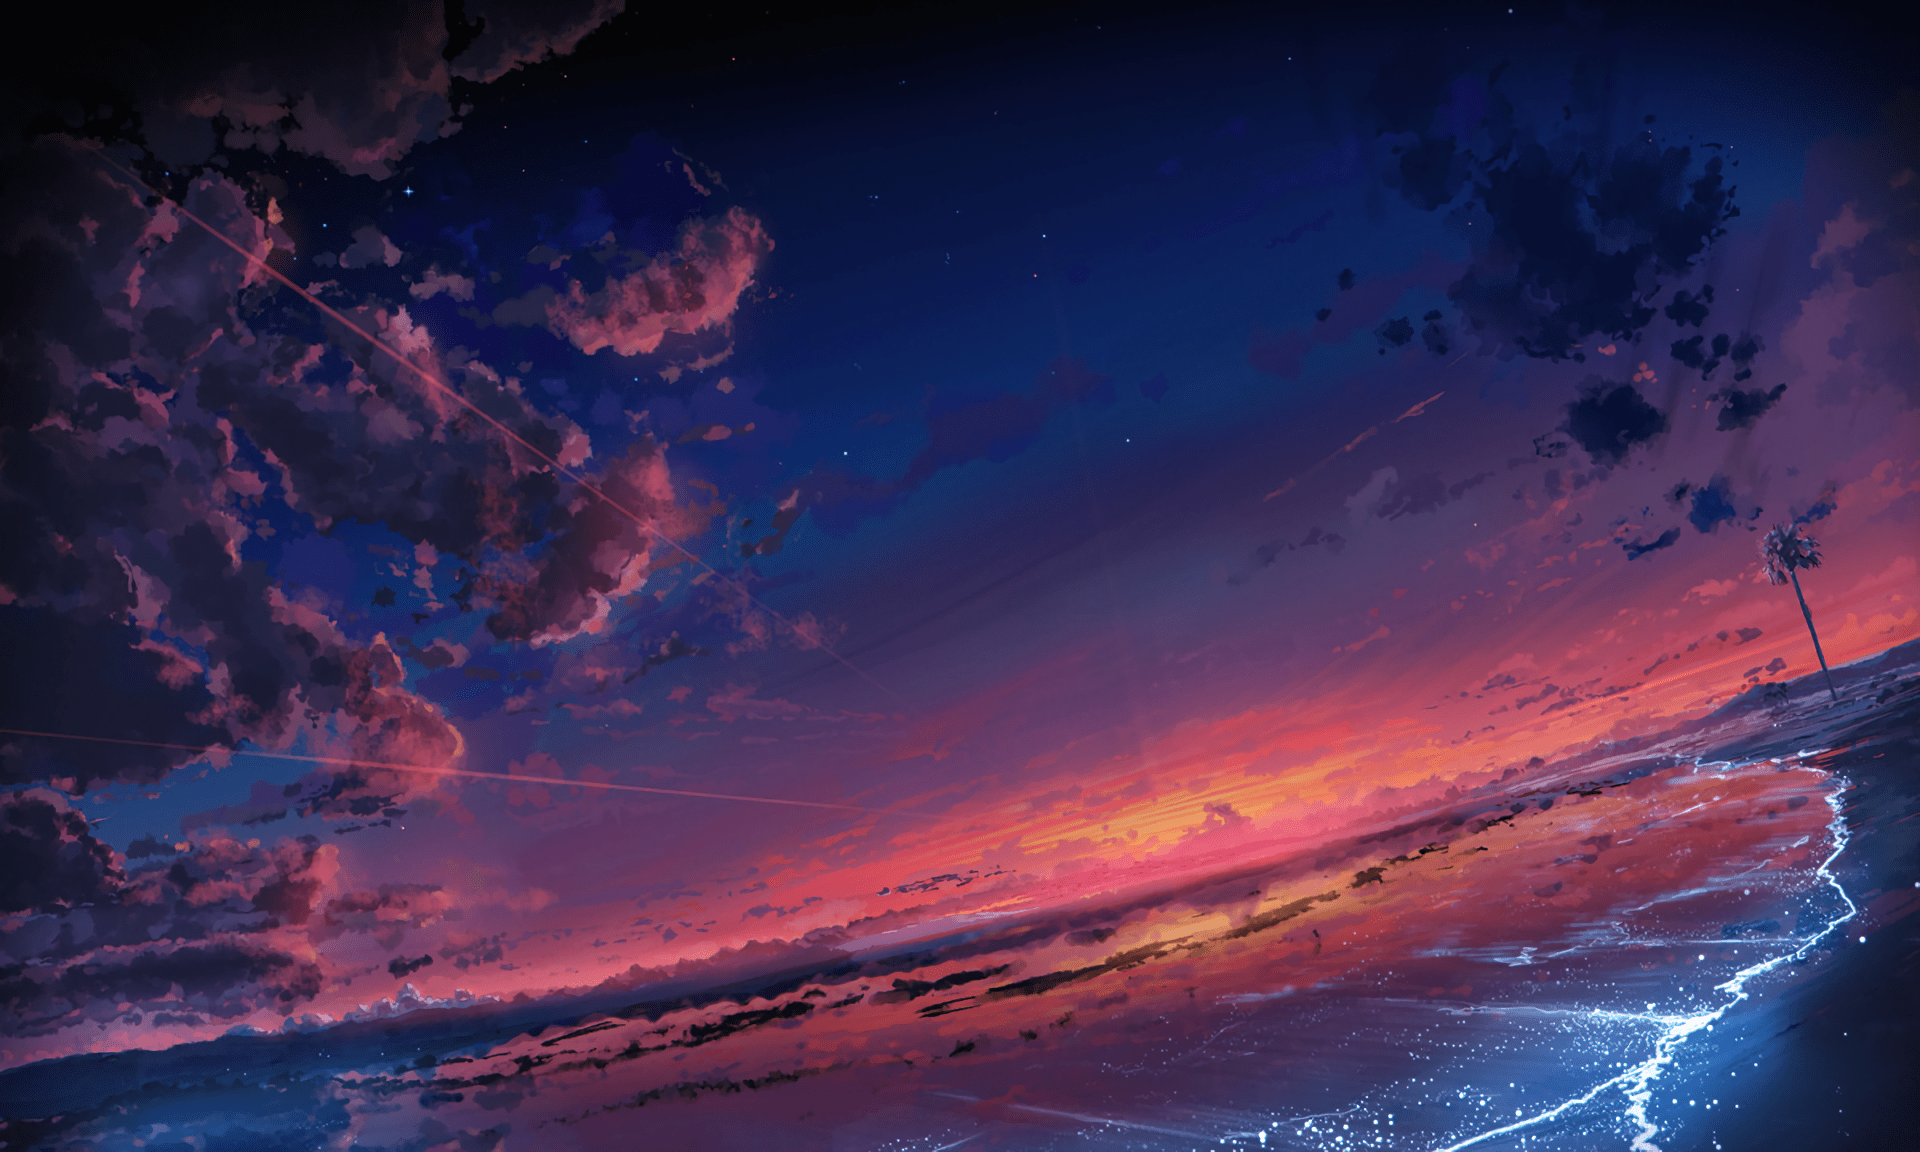 Sunset Anime Scenery Wallpapers Top Free Sunset Anime Scenery